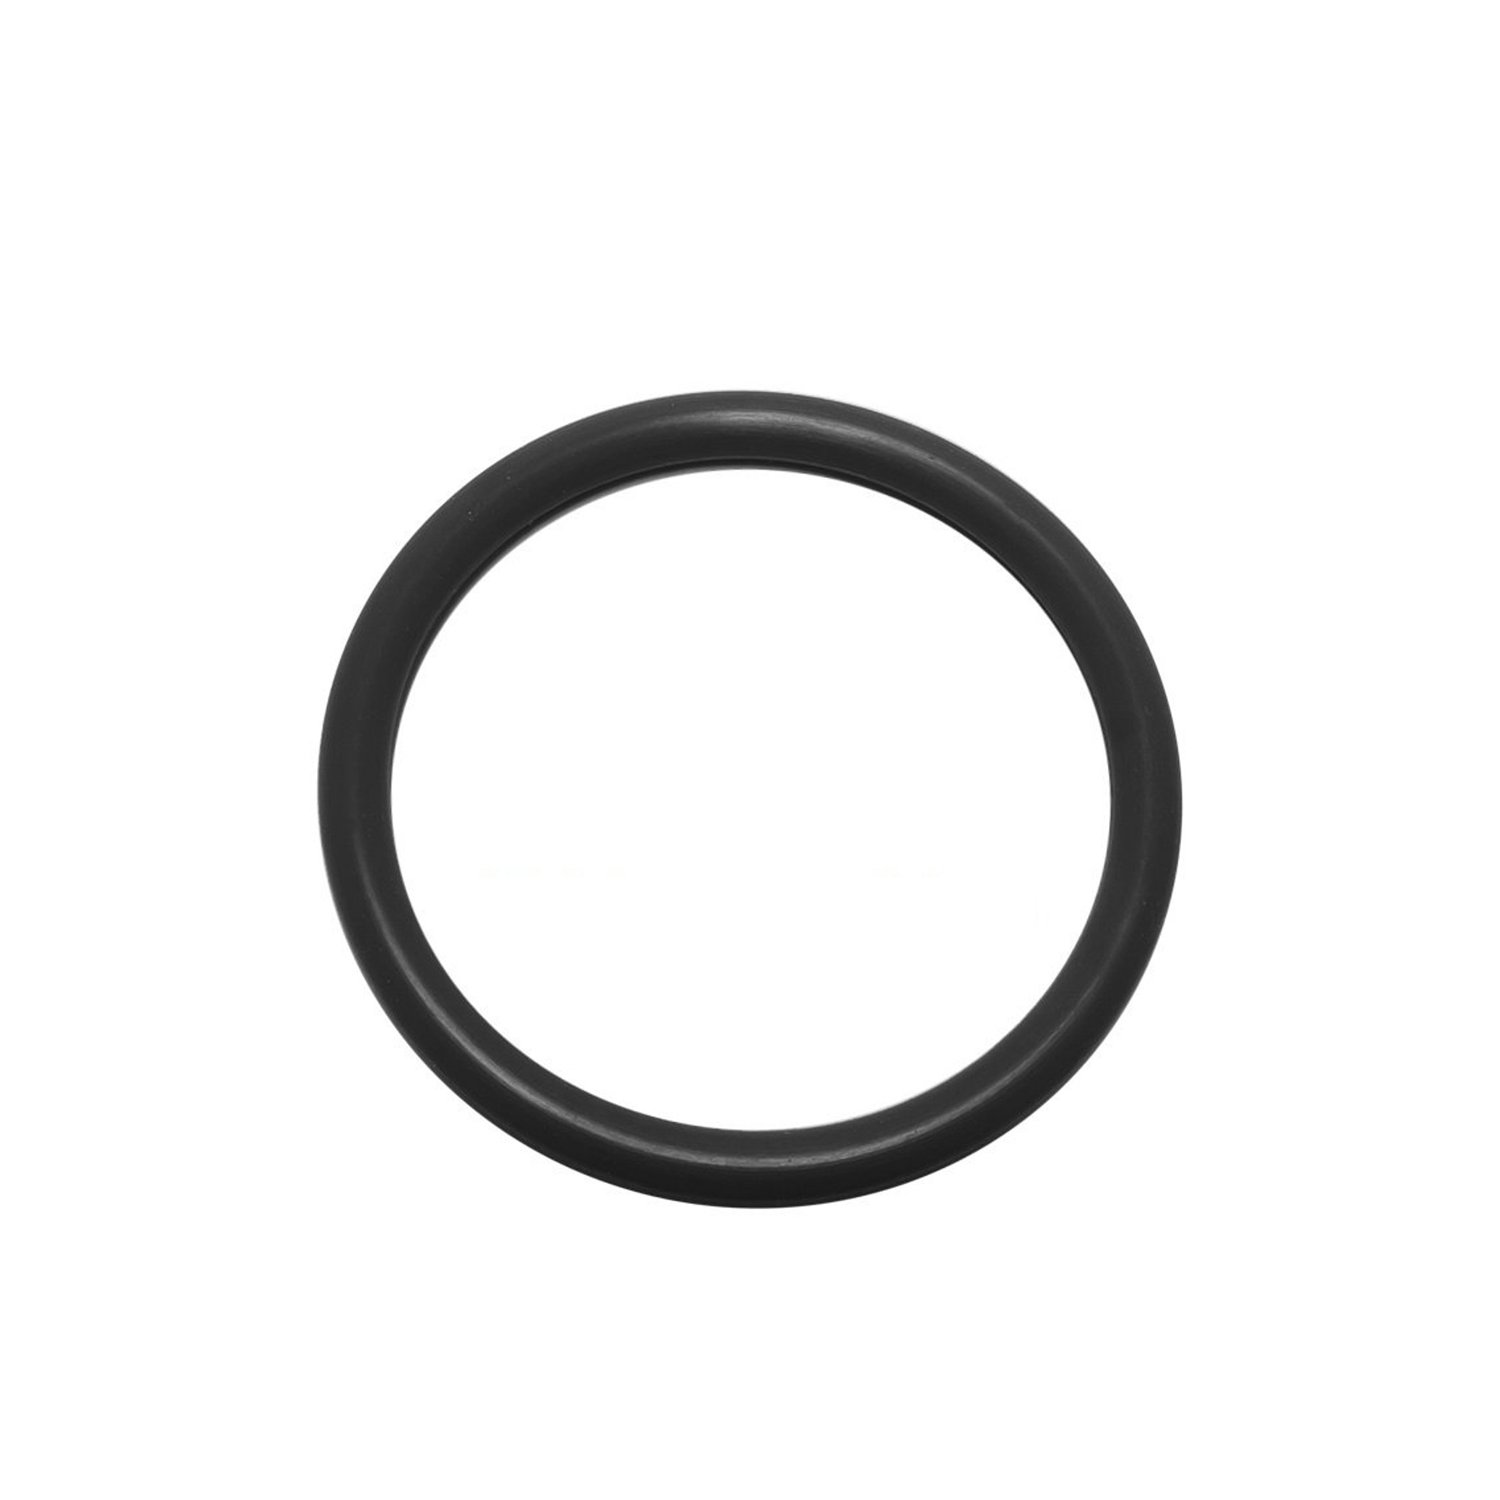 O-ringen 6.07 x 1.78 mm 1 pc HNBR-rubber, voor airconditioning R12 & R134A